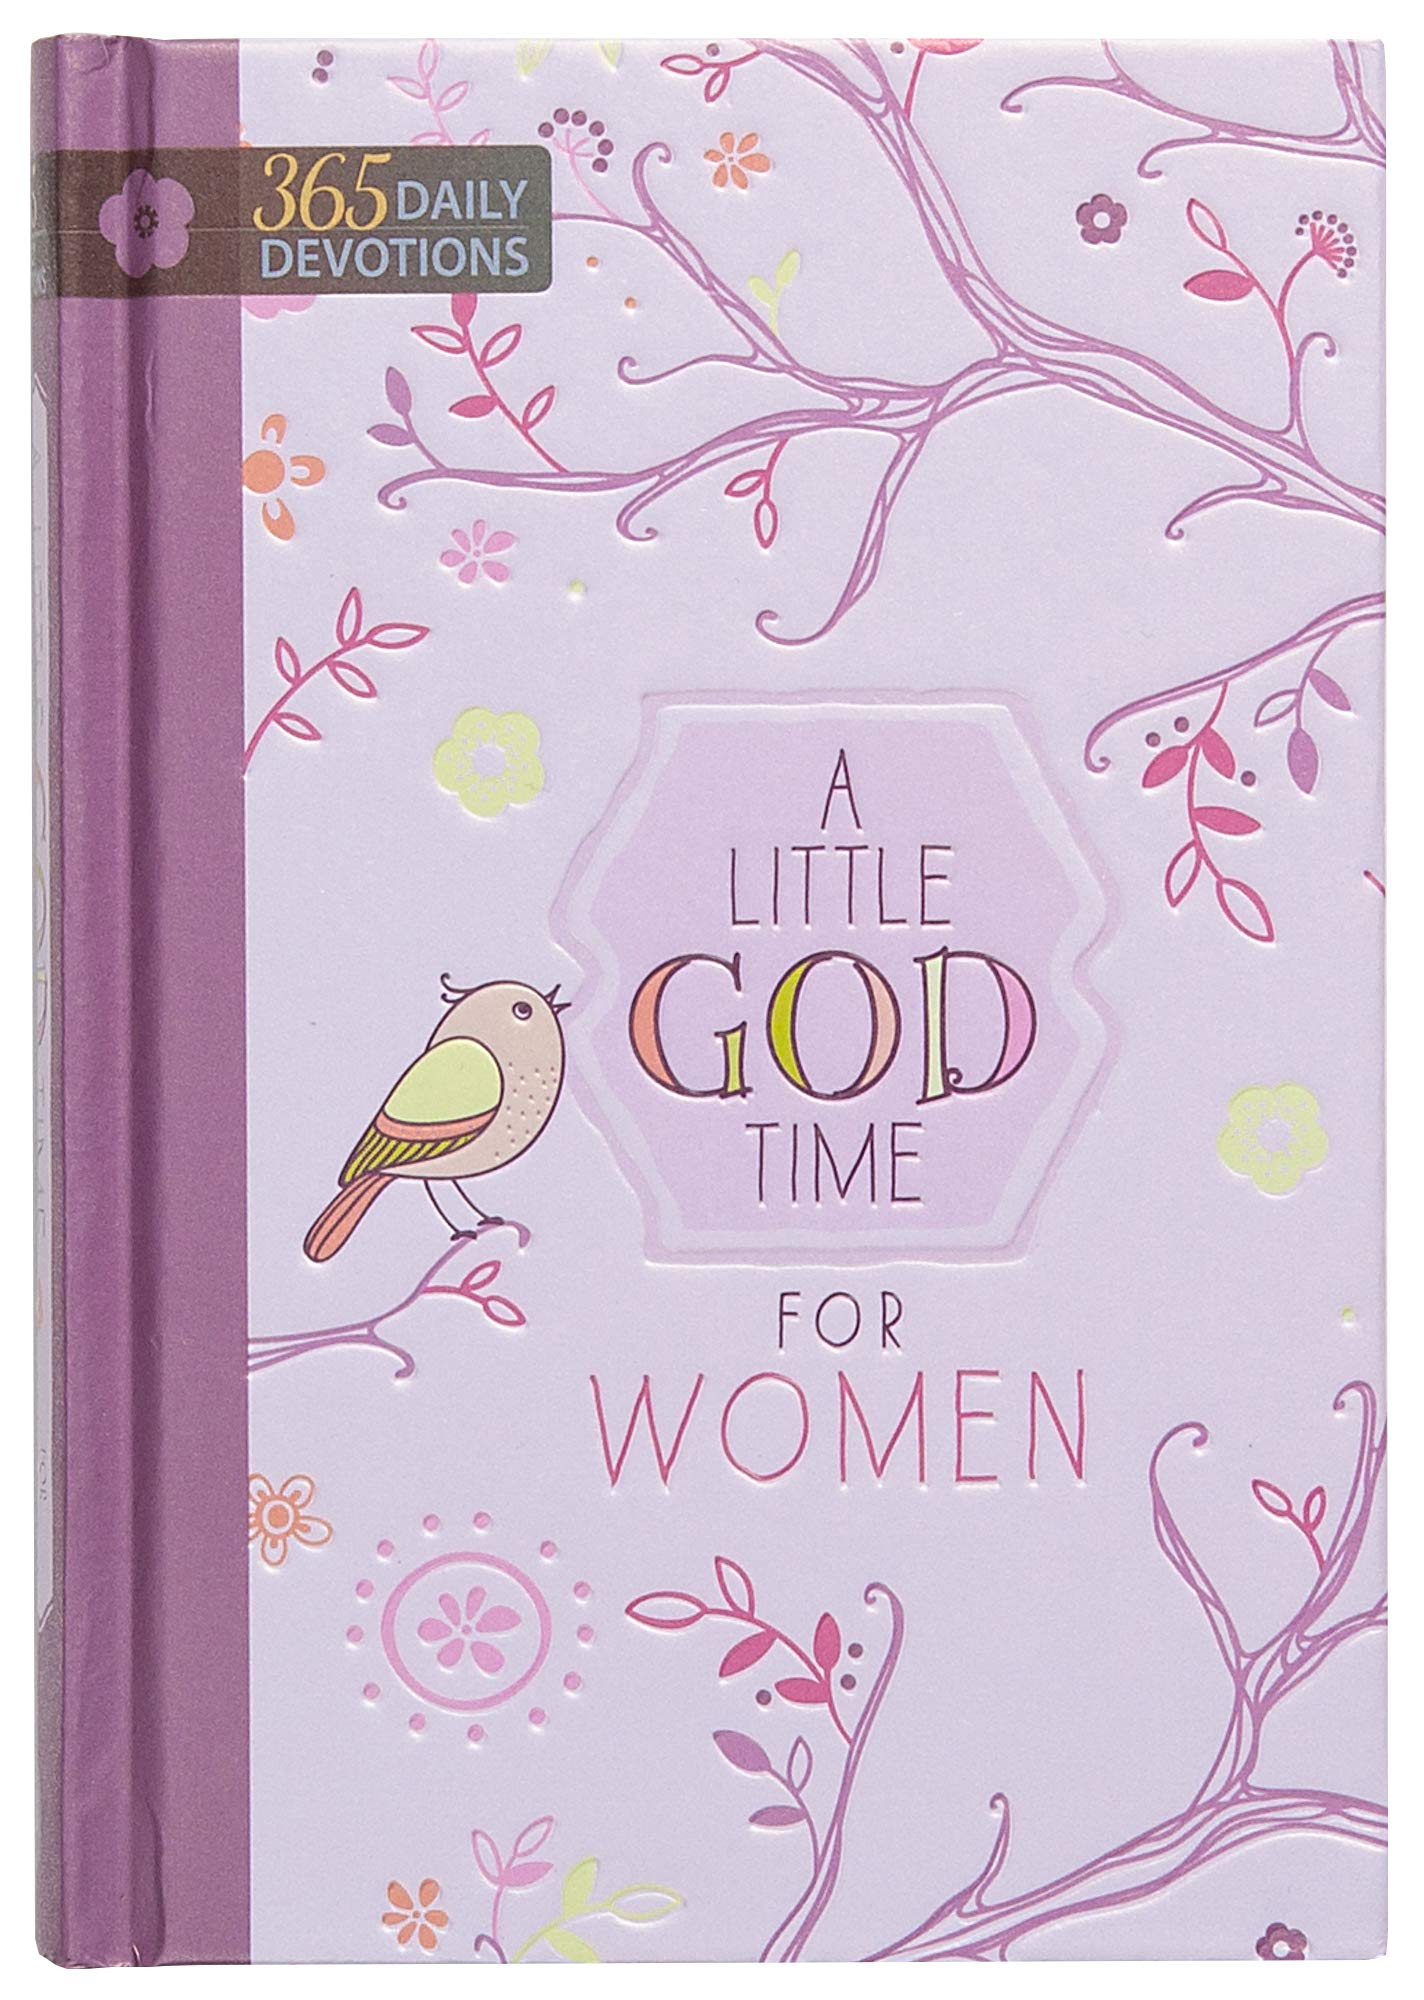 A Little God Time for Women: 365 Daily Devotions (Hardcover)